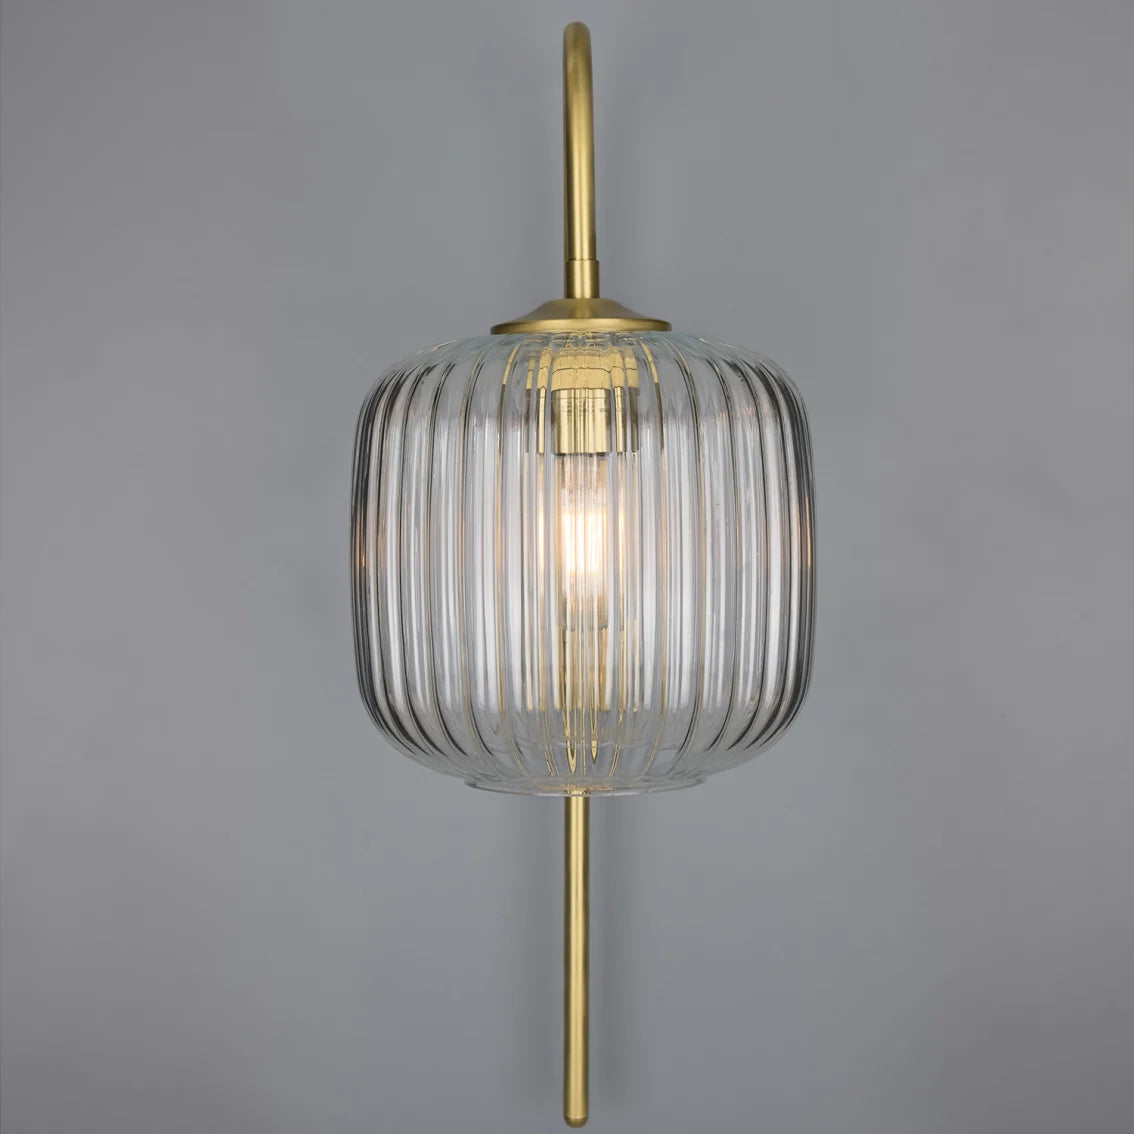 Shannon Reeded Glass Wall Light